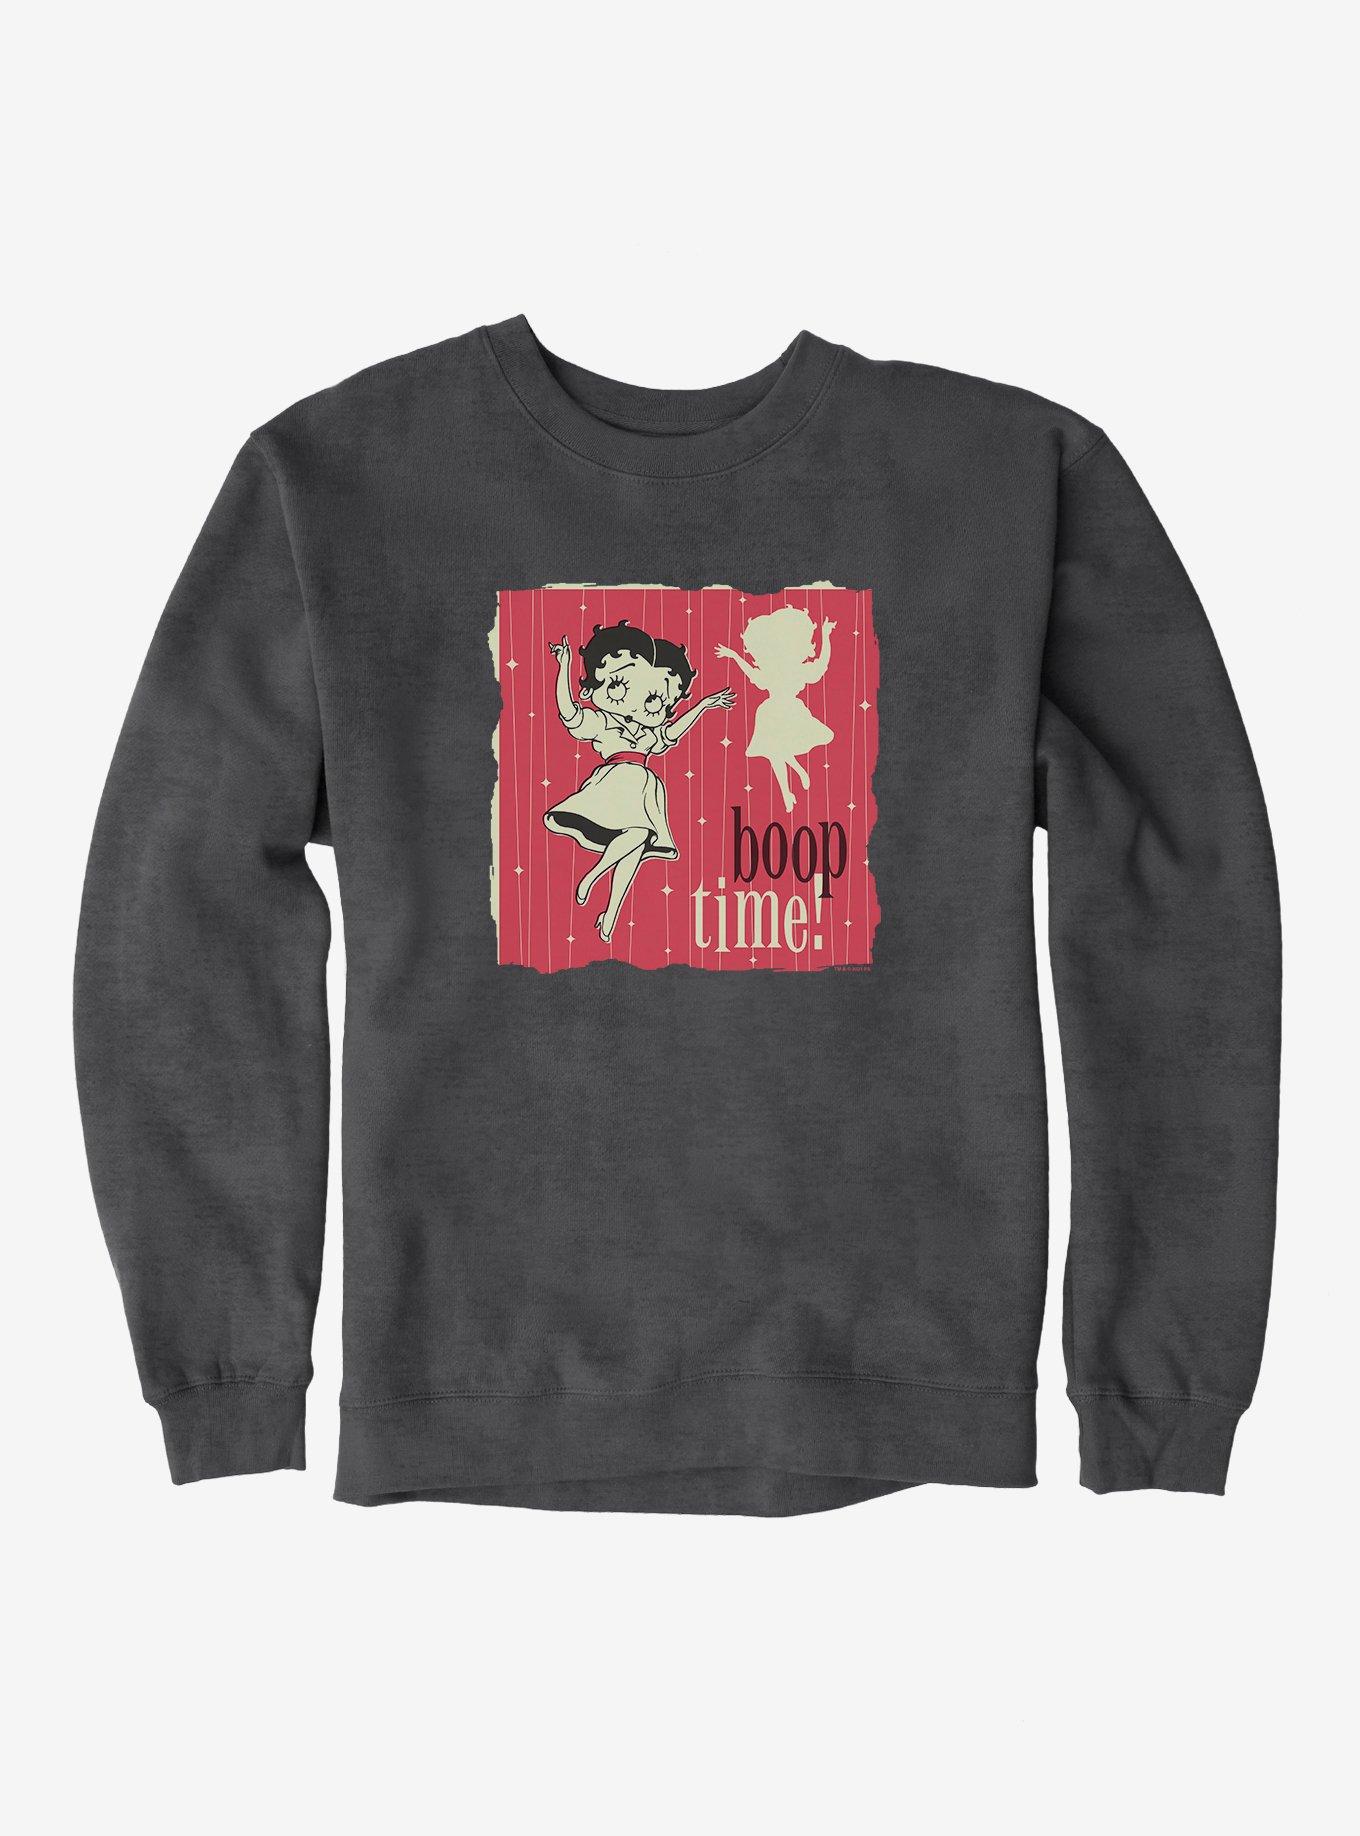 Betty Boop Time For A Sweatshirt